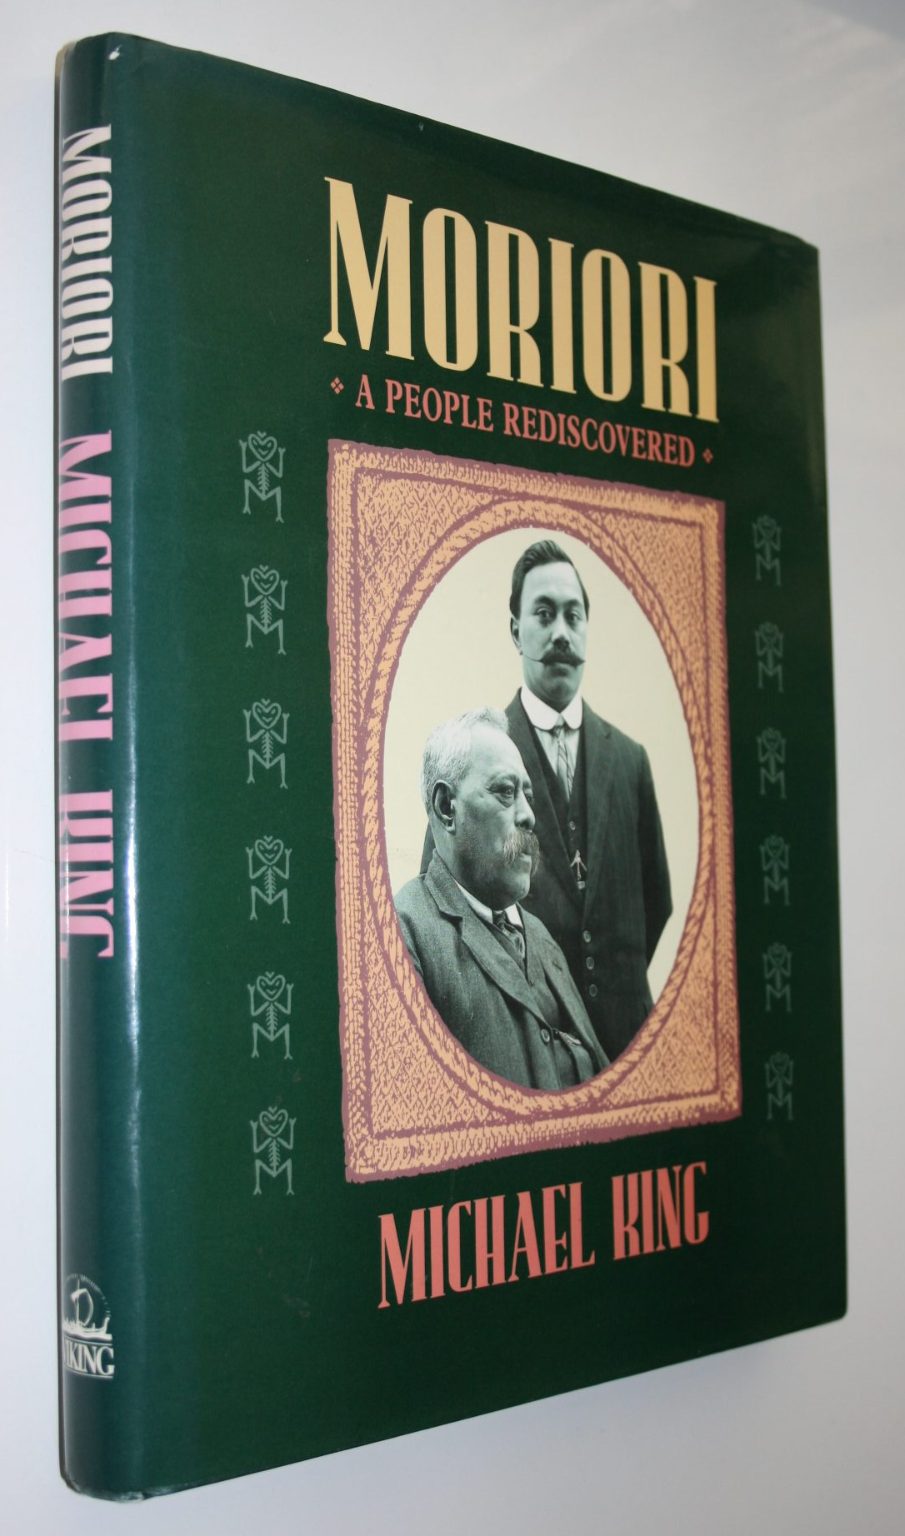 Moriori: A People Rediscovered. (Hardback) By Michael King